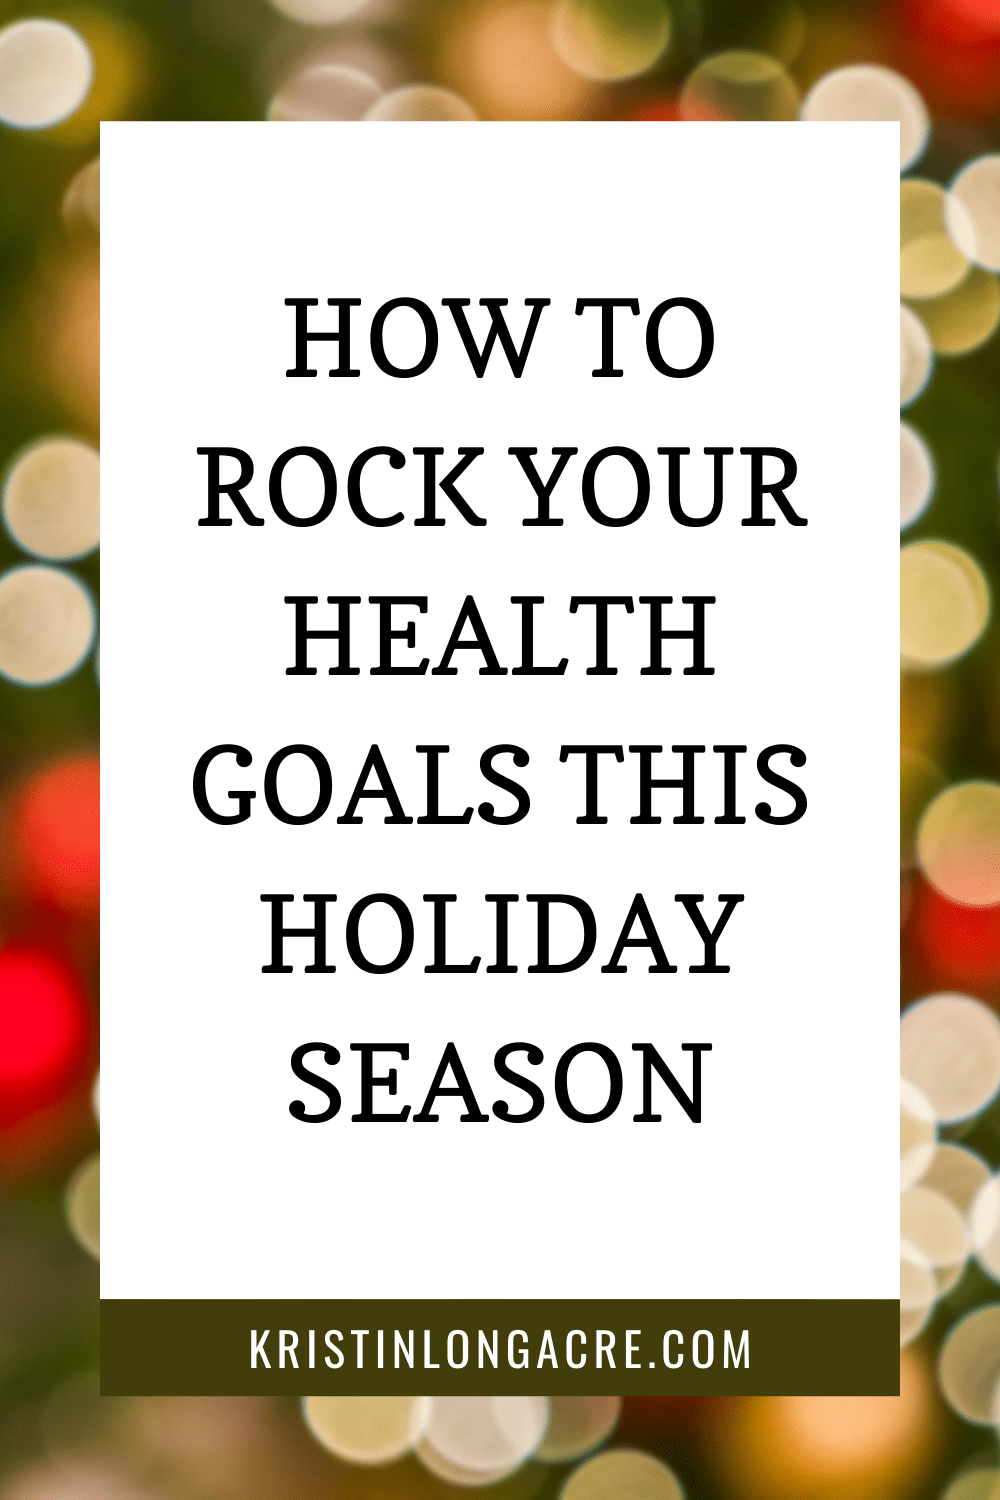 How To Rock Your Health Goals